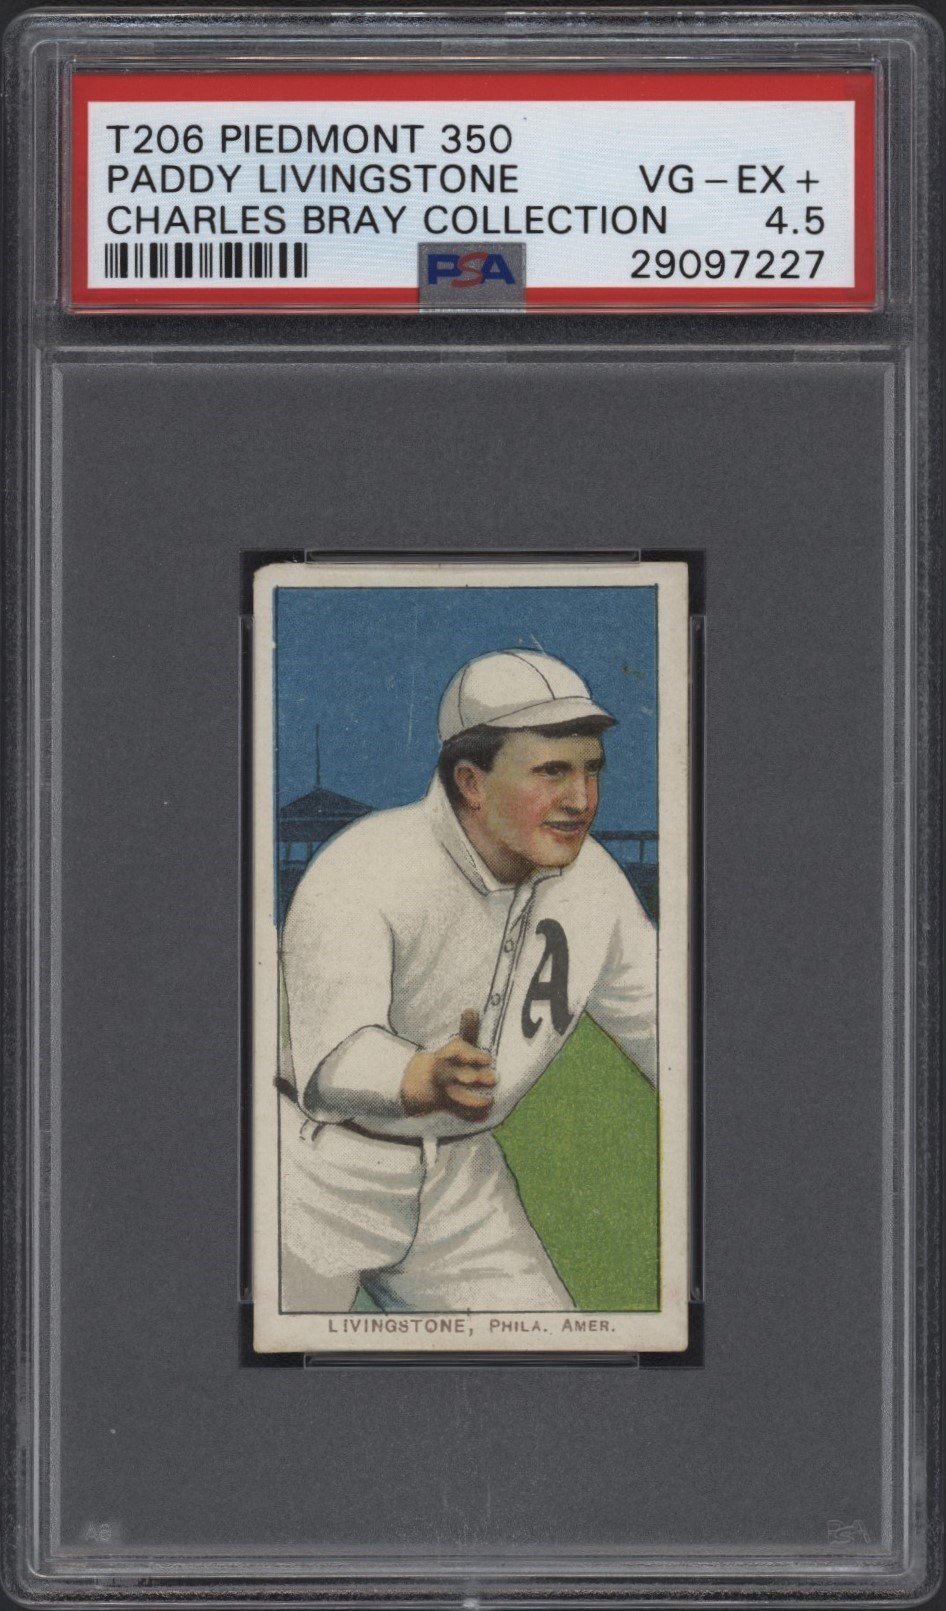 T206 Piedmont 350 Paddy Livingstone PSA 4.5 From the Charles Bray Collection